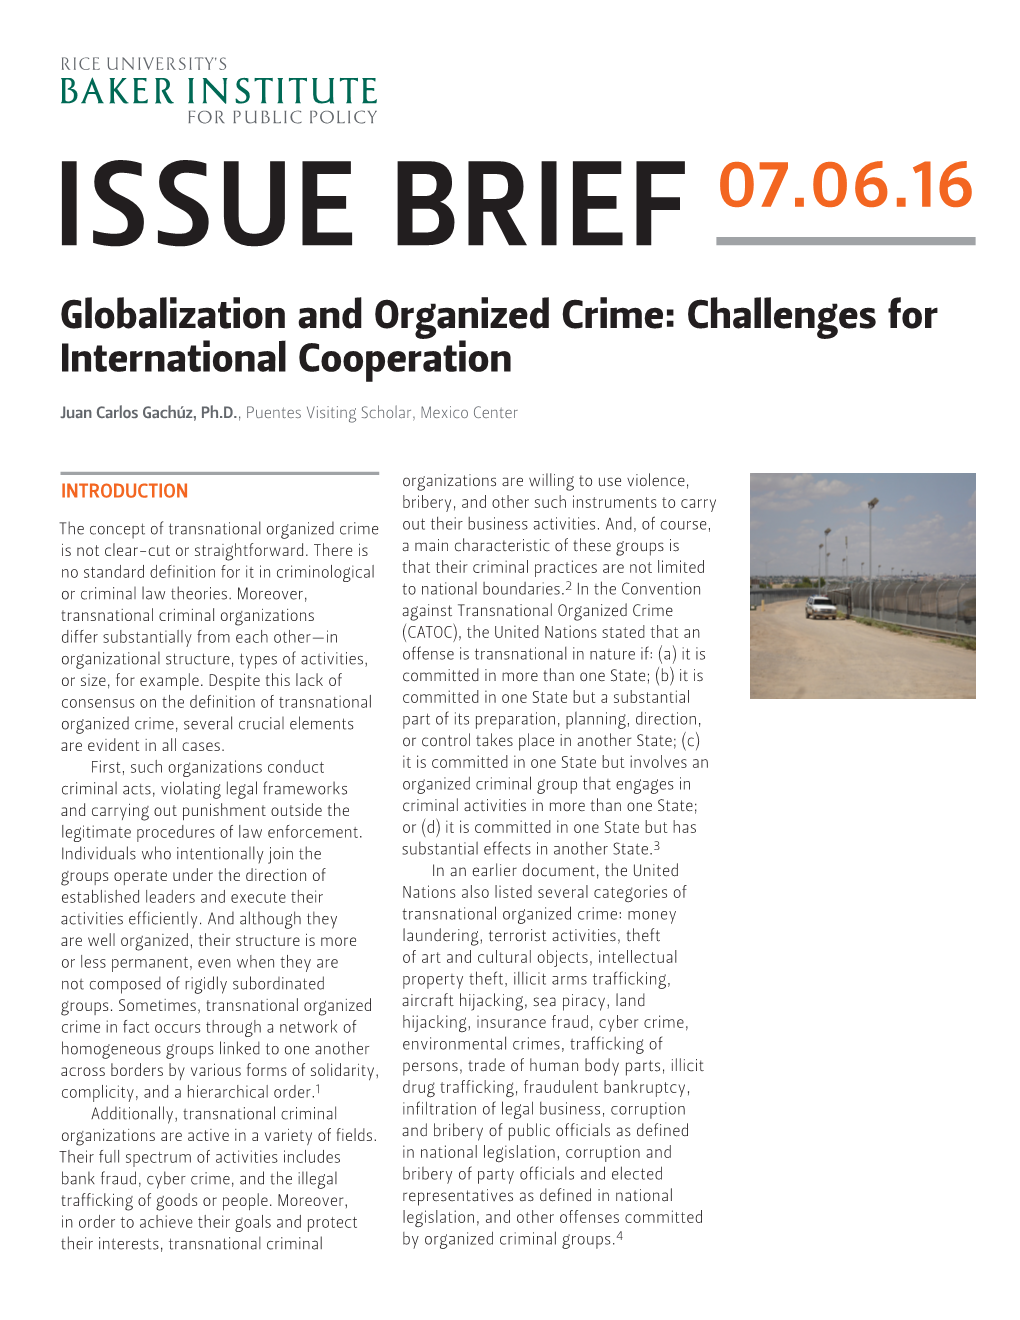 Globalization and Organized Crime: Challenges for International Cooperation